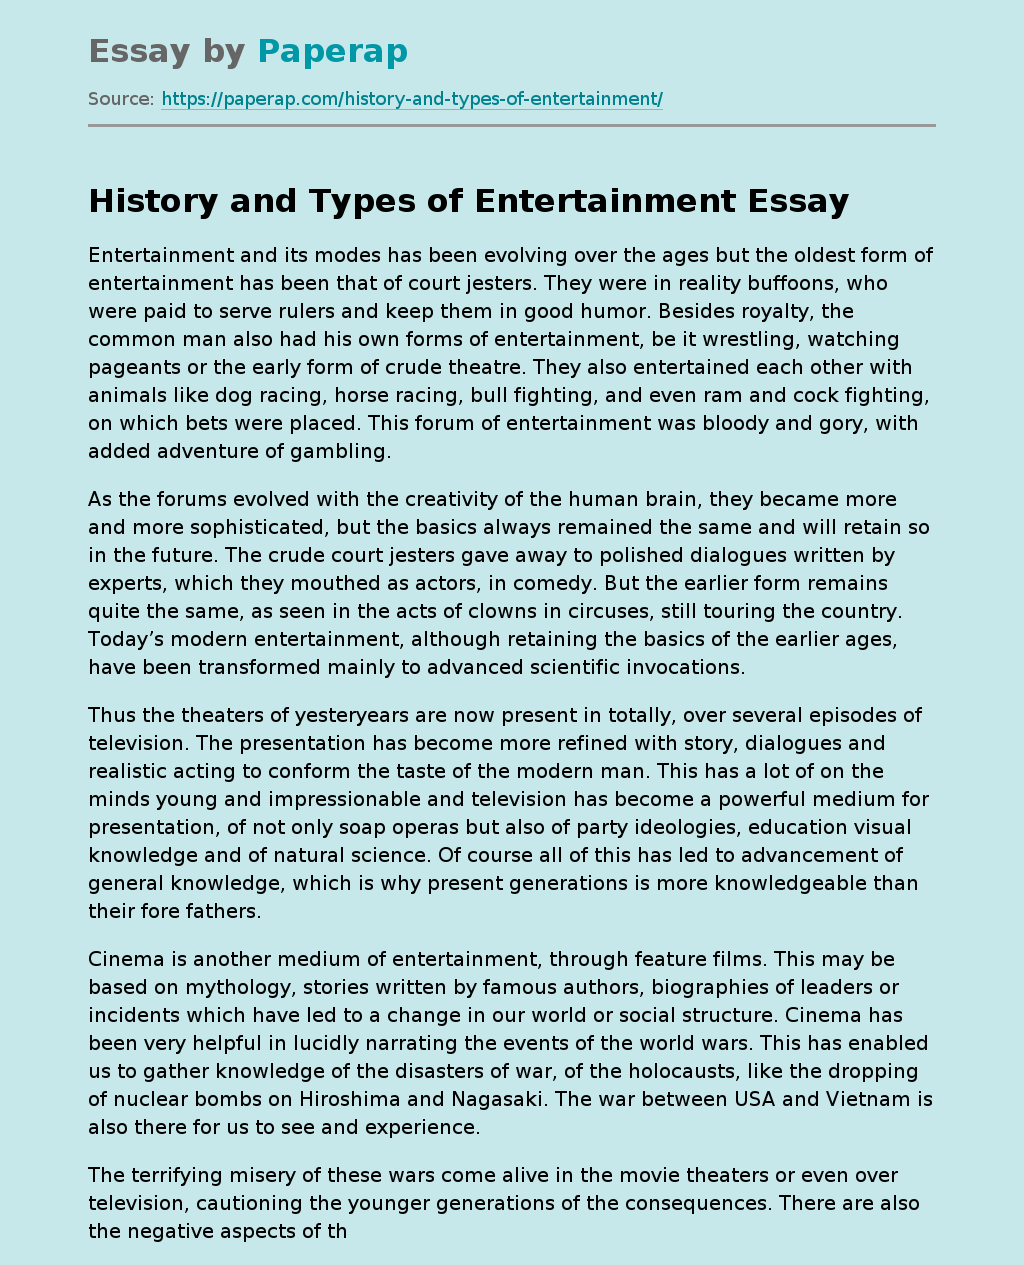 History and Types of Entertainment